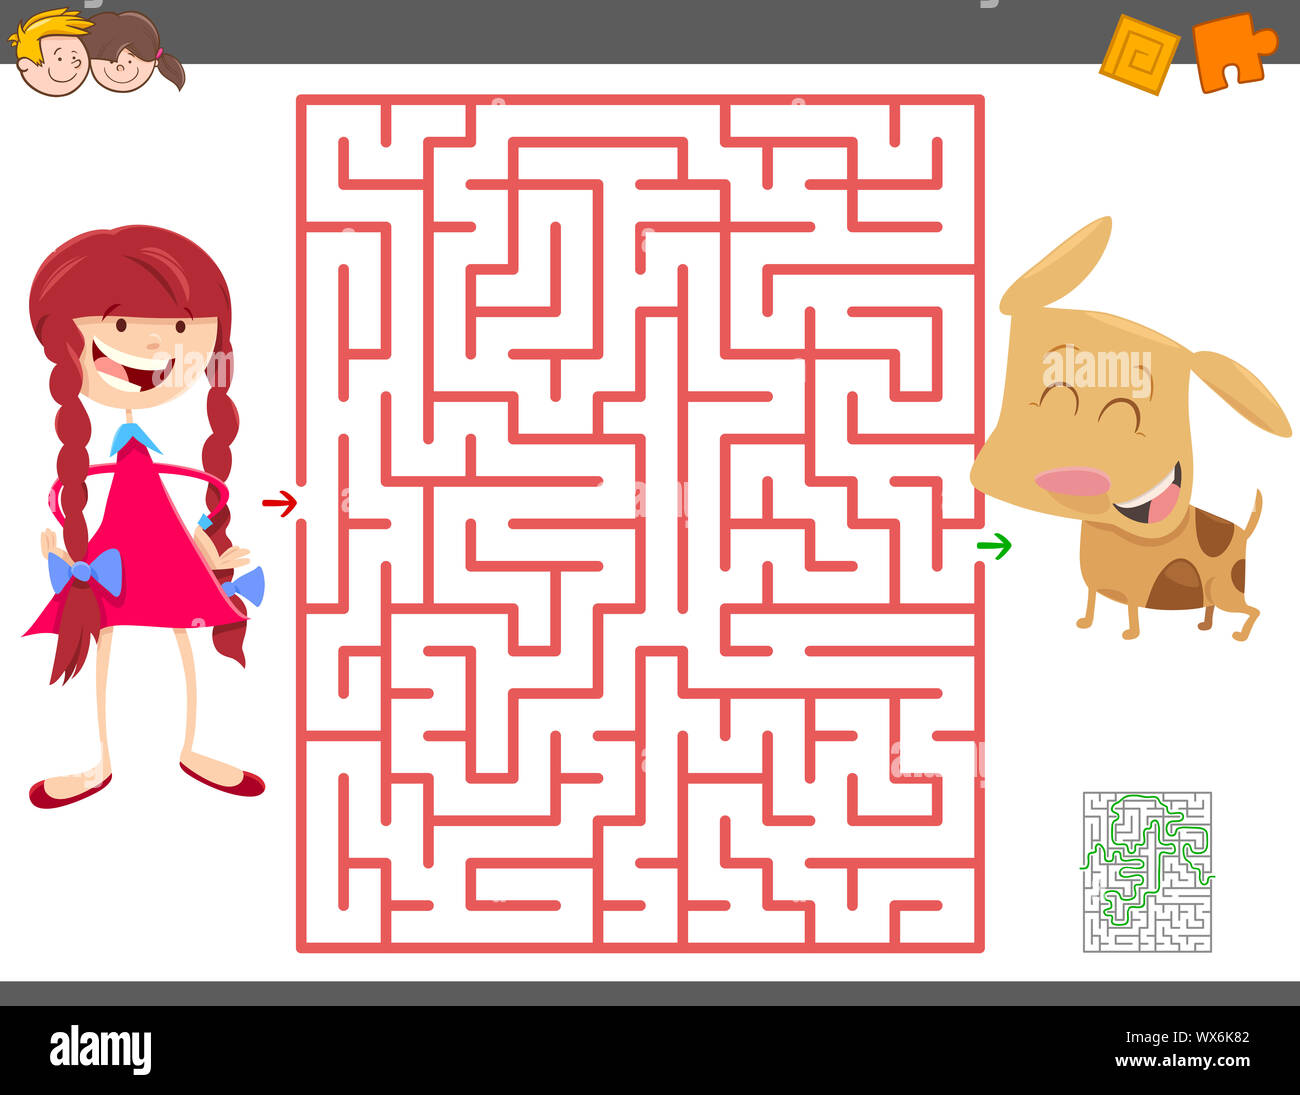 maze game with girl and her pet dog Stock Photo - Alamy